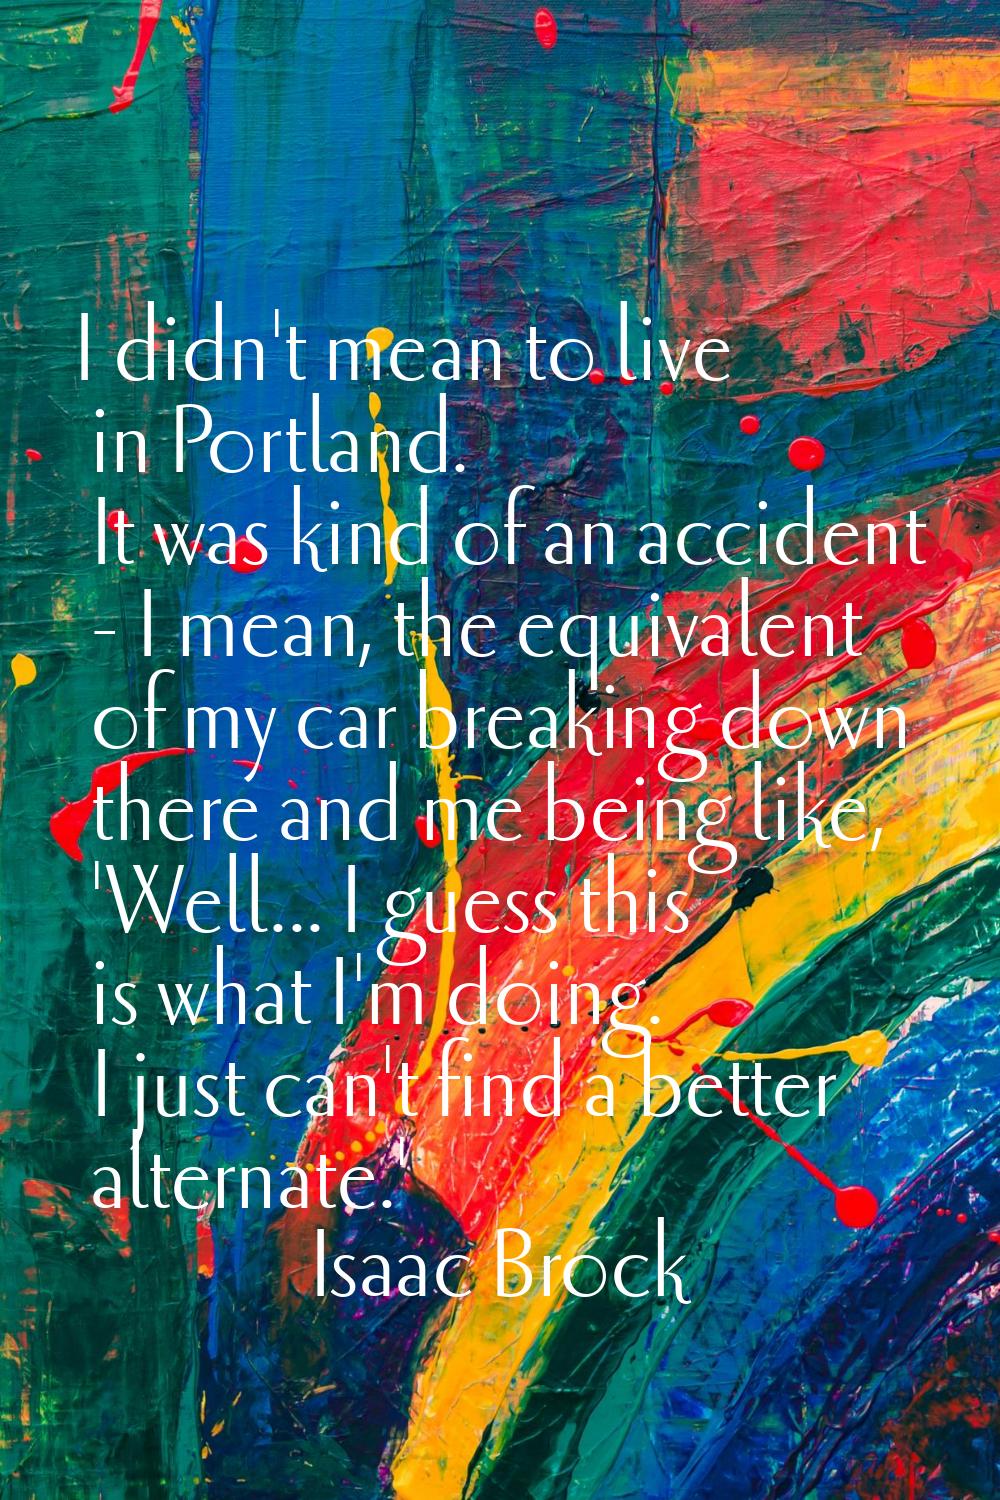 I didn't mean to live in Portland. It was kind of an accident - I mean, the equivalent of my car br